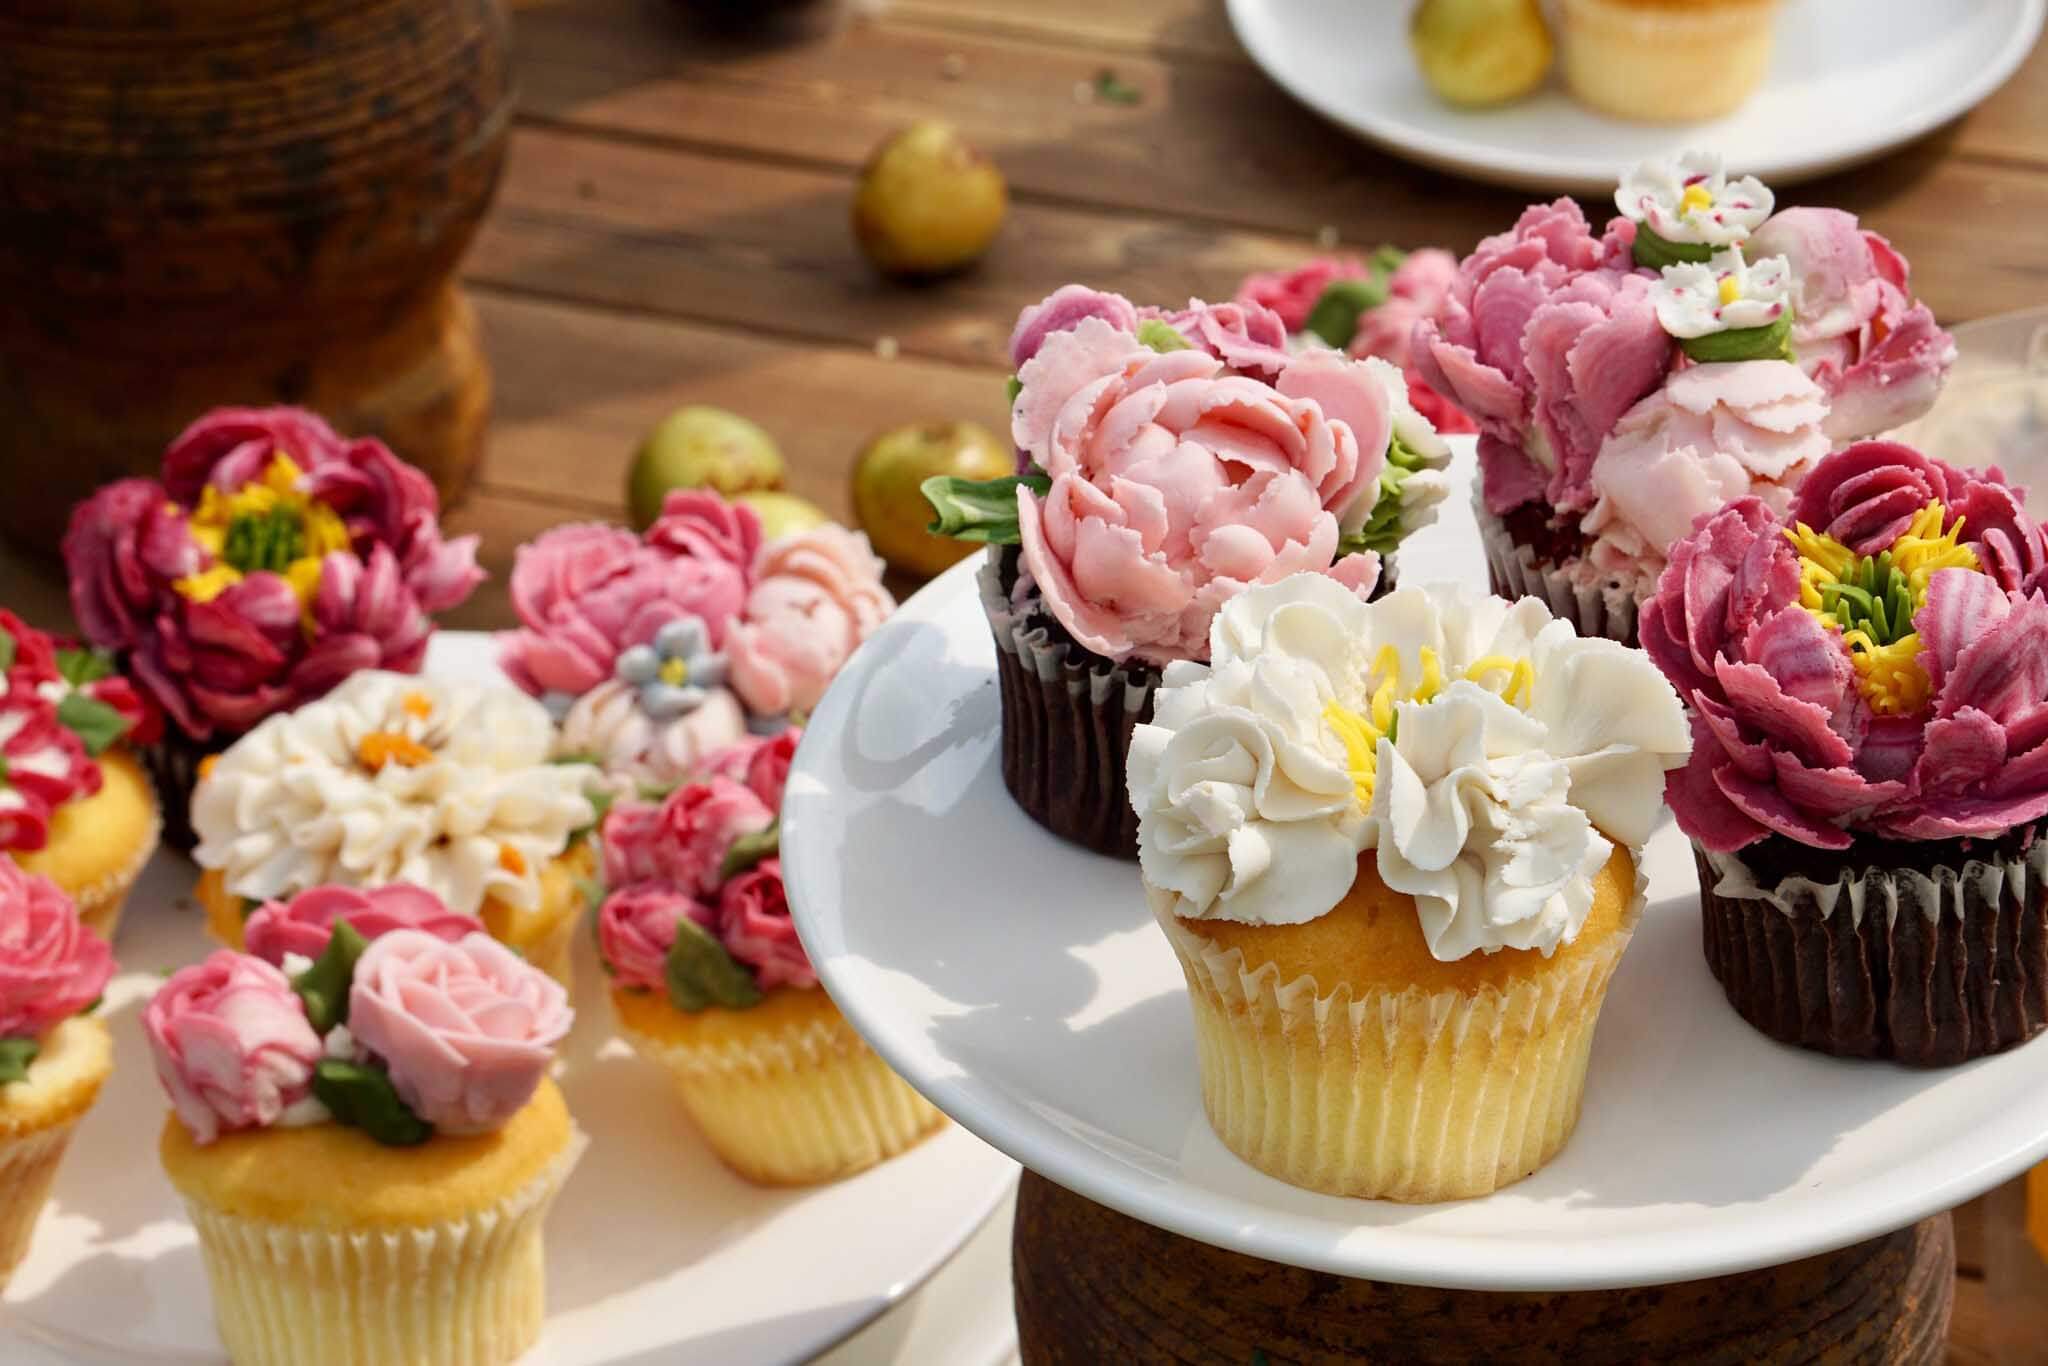 Cupcakes with flowers on the top. 